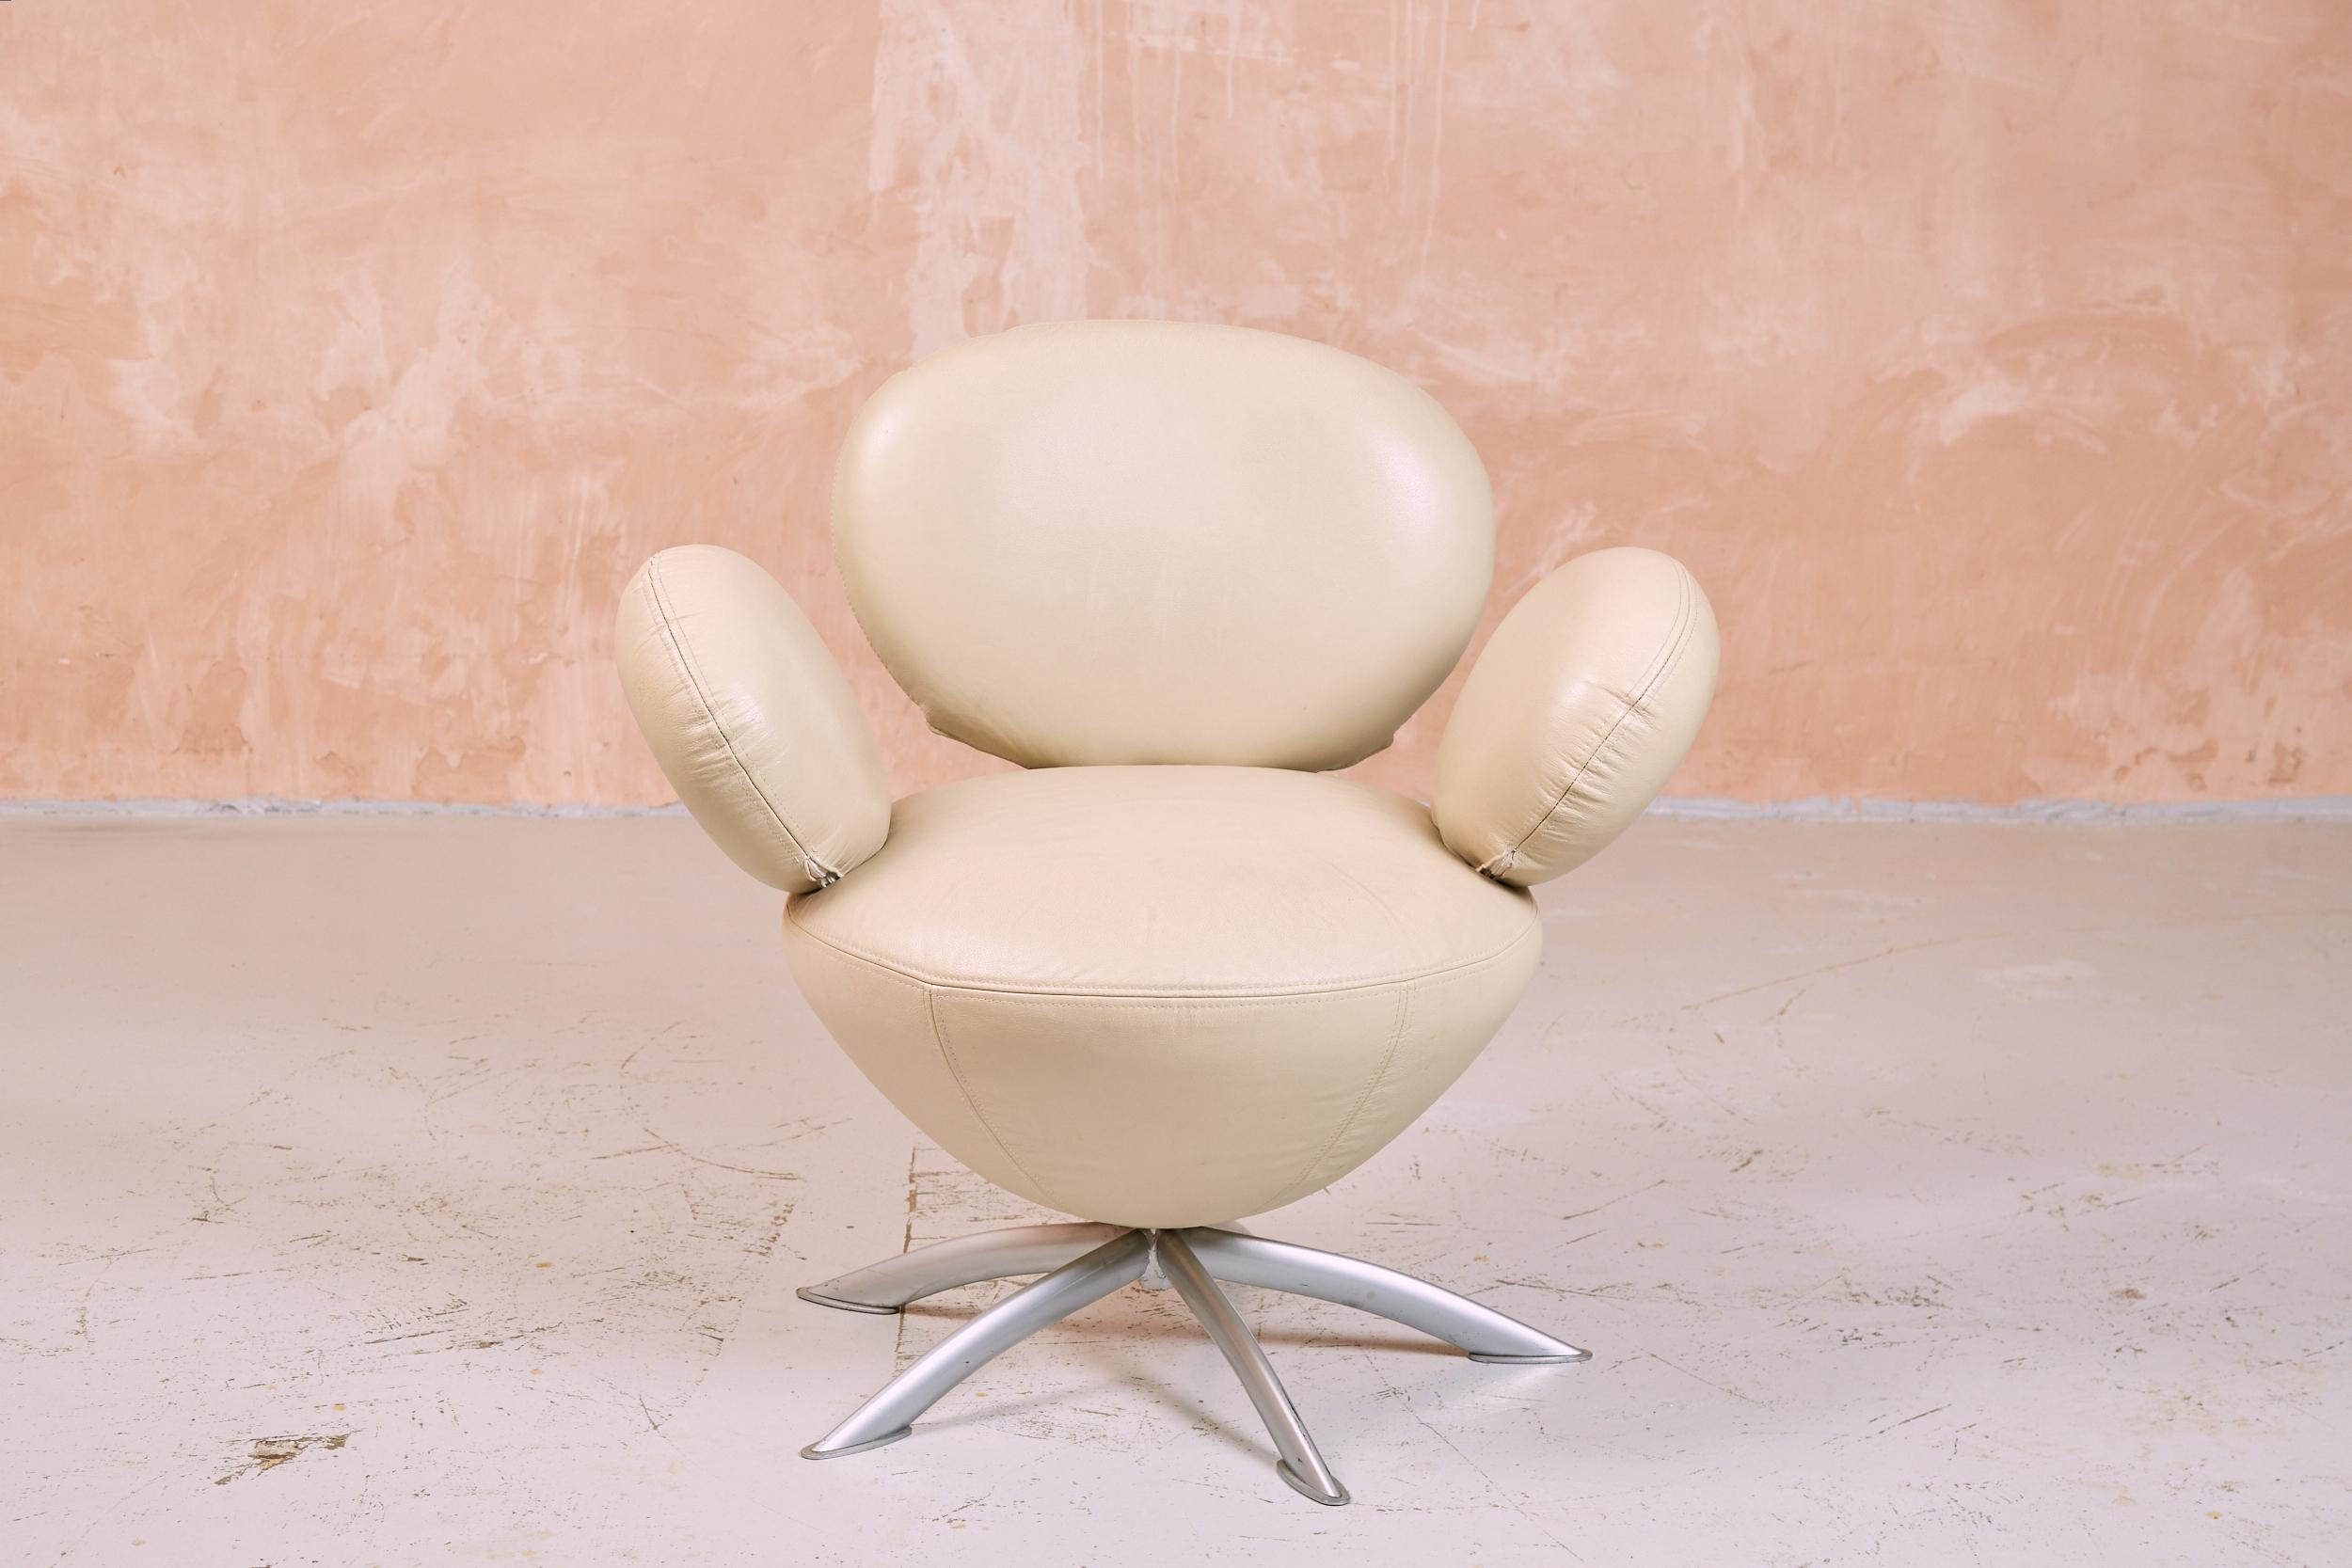 An unusual balloon chair finished in cream faux leather.
Uniquely sculpted in a style variously attributed to mid-century master Arne Jacobsen, and postmodern artist, Jeff Koons, this comfortable and stylish modern chair set makes a striking and